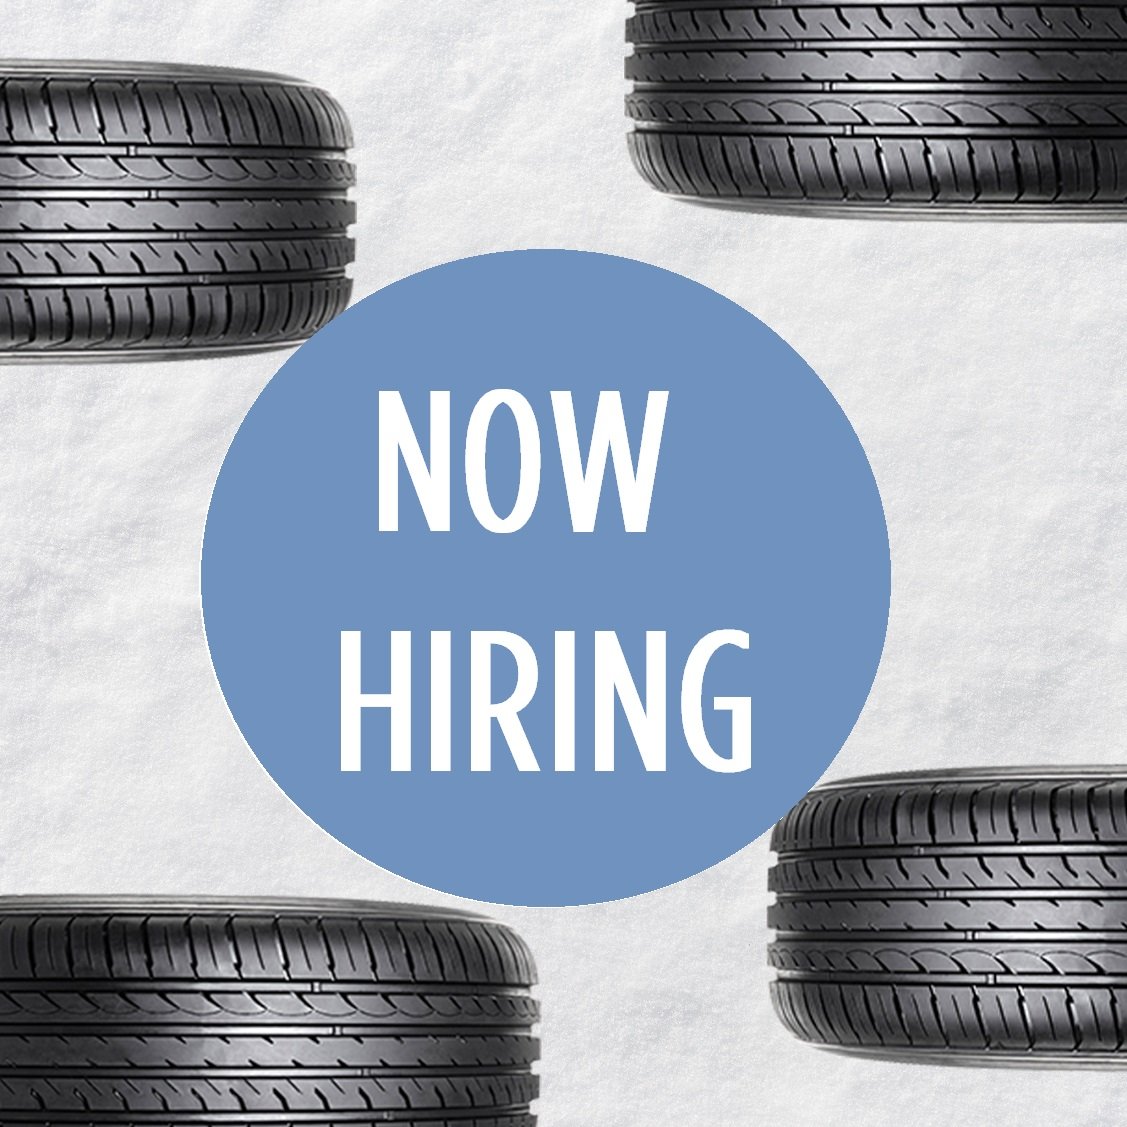 Sears Auto is #hiring in the Denver area! Technician🔧and Service Advisor openings available at our Thornton, CO auto center. Apply Now>>>bit.ly/2T0l7Wb #hiring #retail #technicians #automotive #jobs